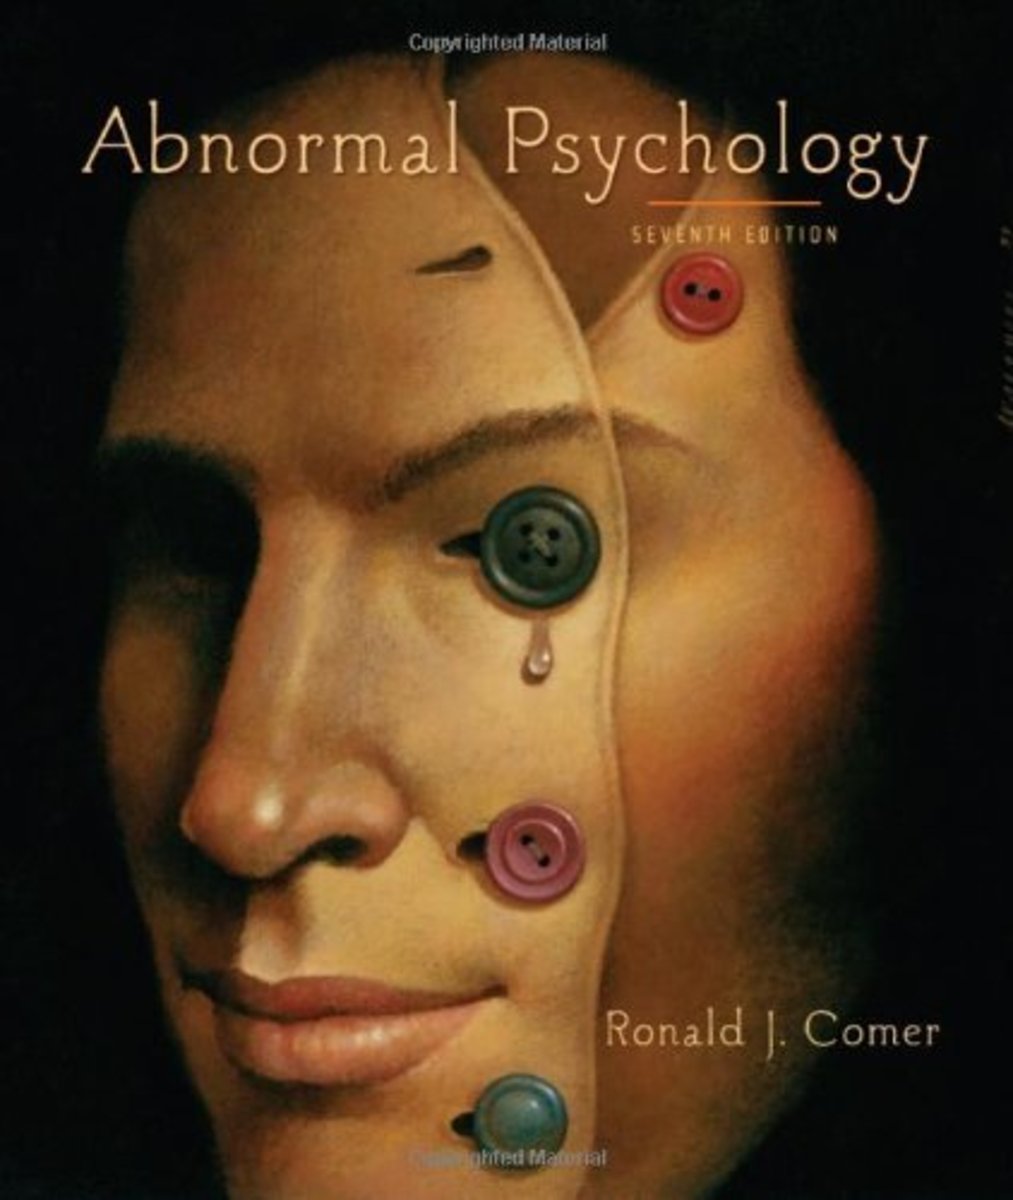 analysis-of-american-psycho-and-abnormal-psychology